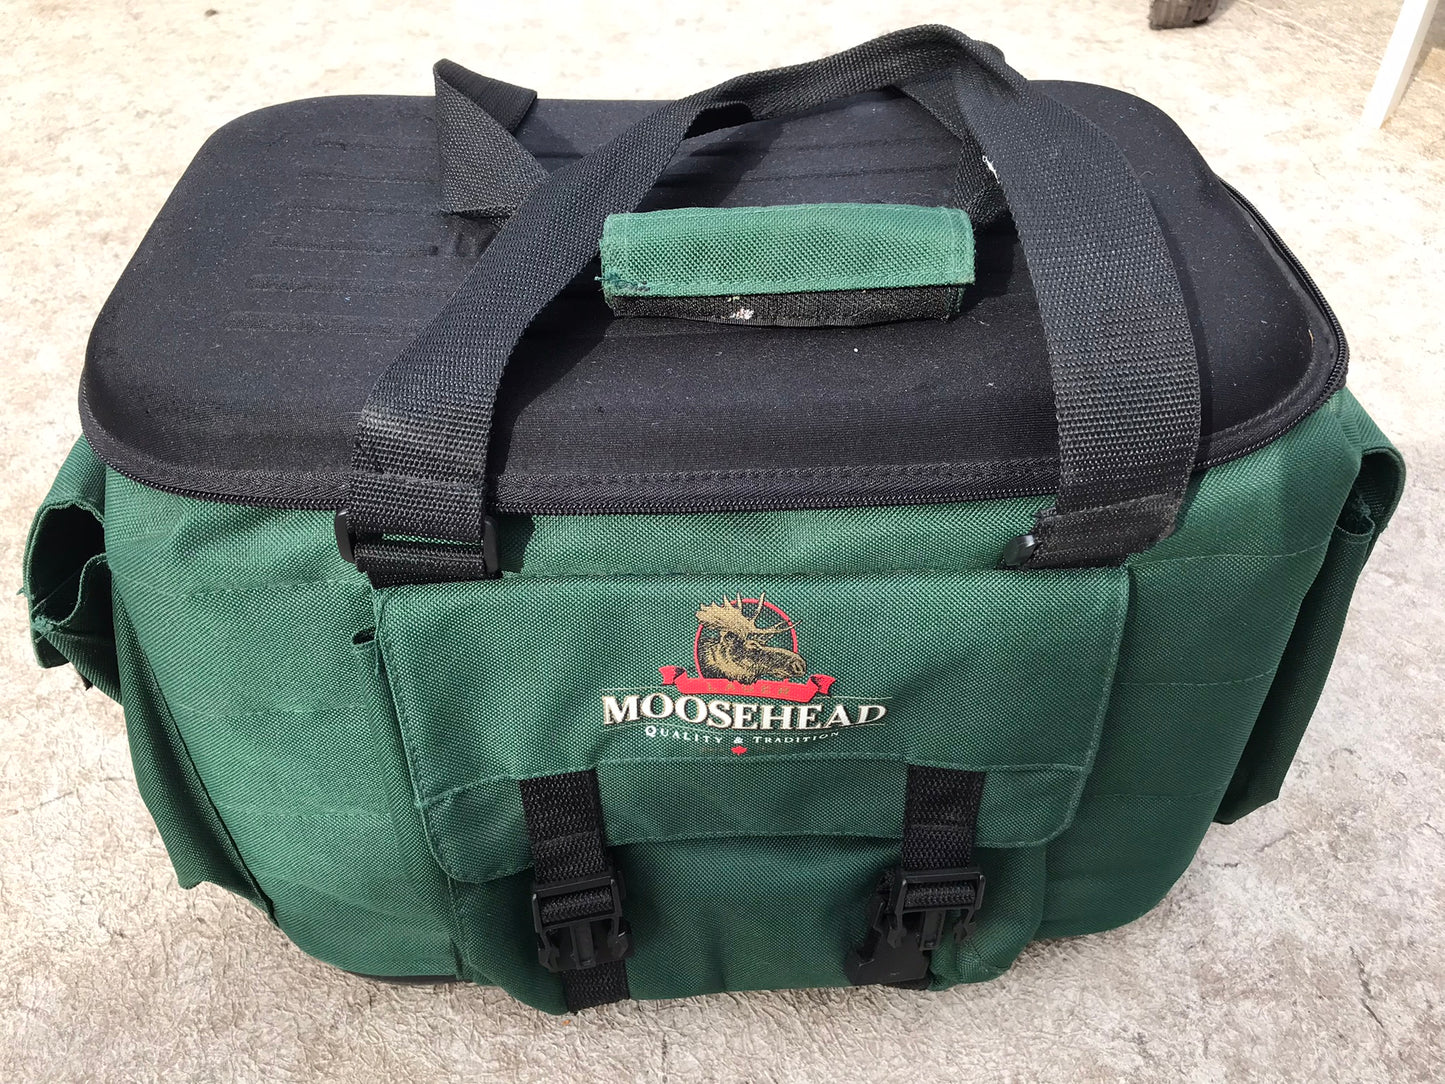 Moosehead Beer Lager Vintage Hunting Fishing Camping Cooler Loaded With Pockets Minor Tear on Inside Lid 16 x 12 x 10 inch Holds 12 Beer and Gear